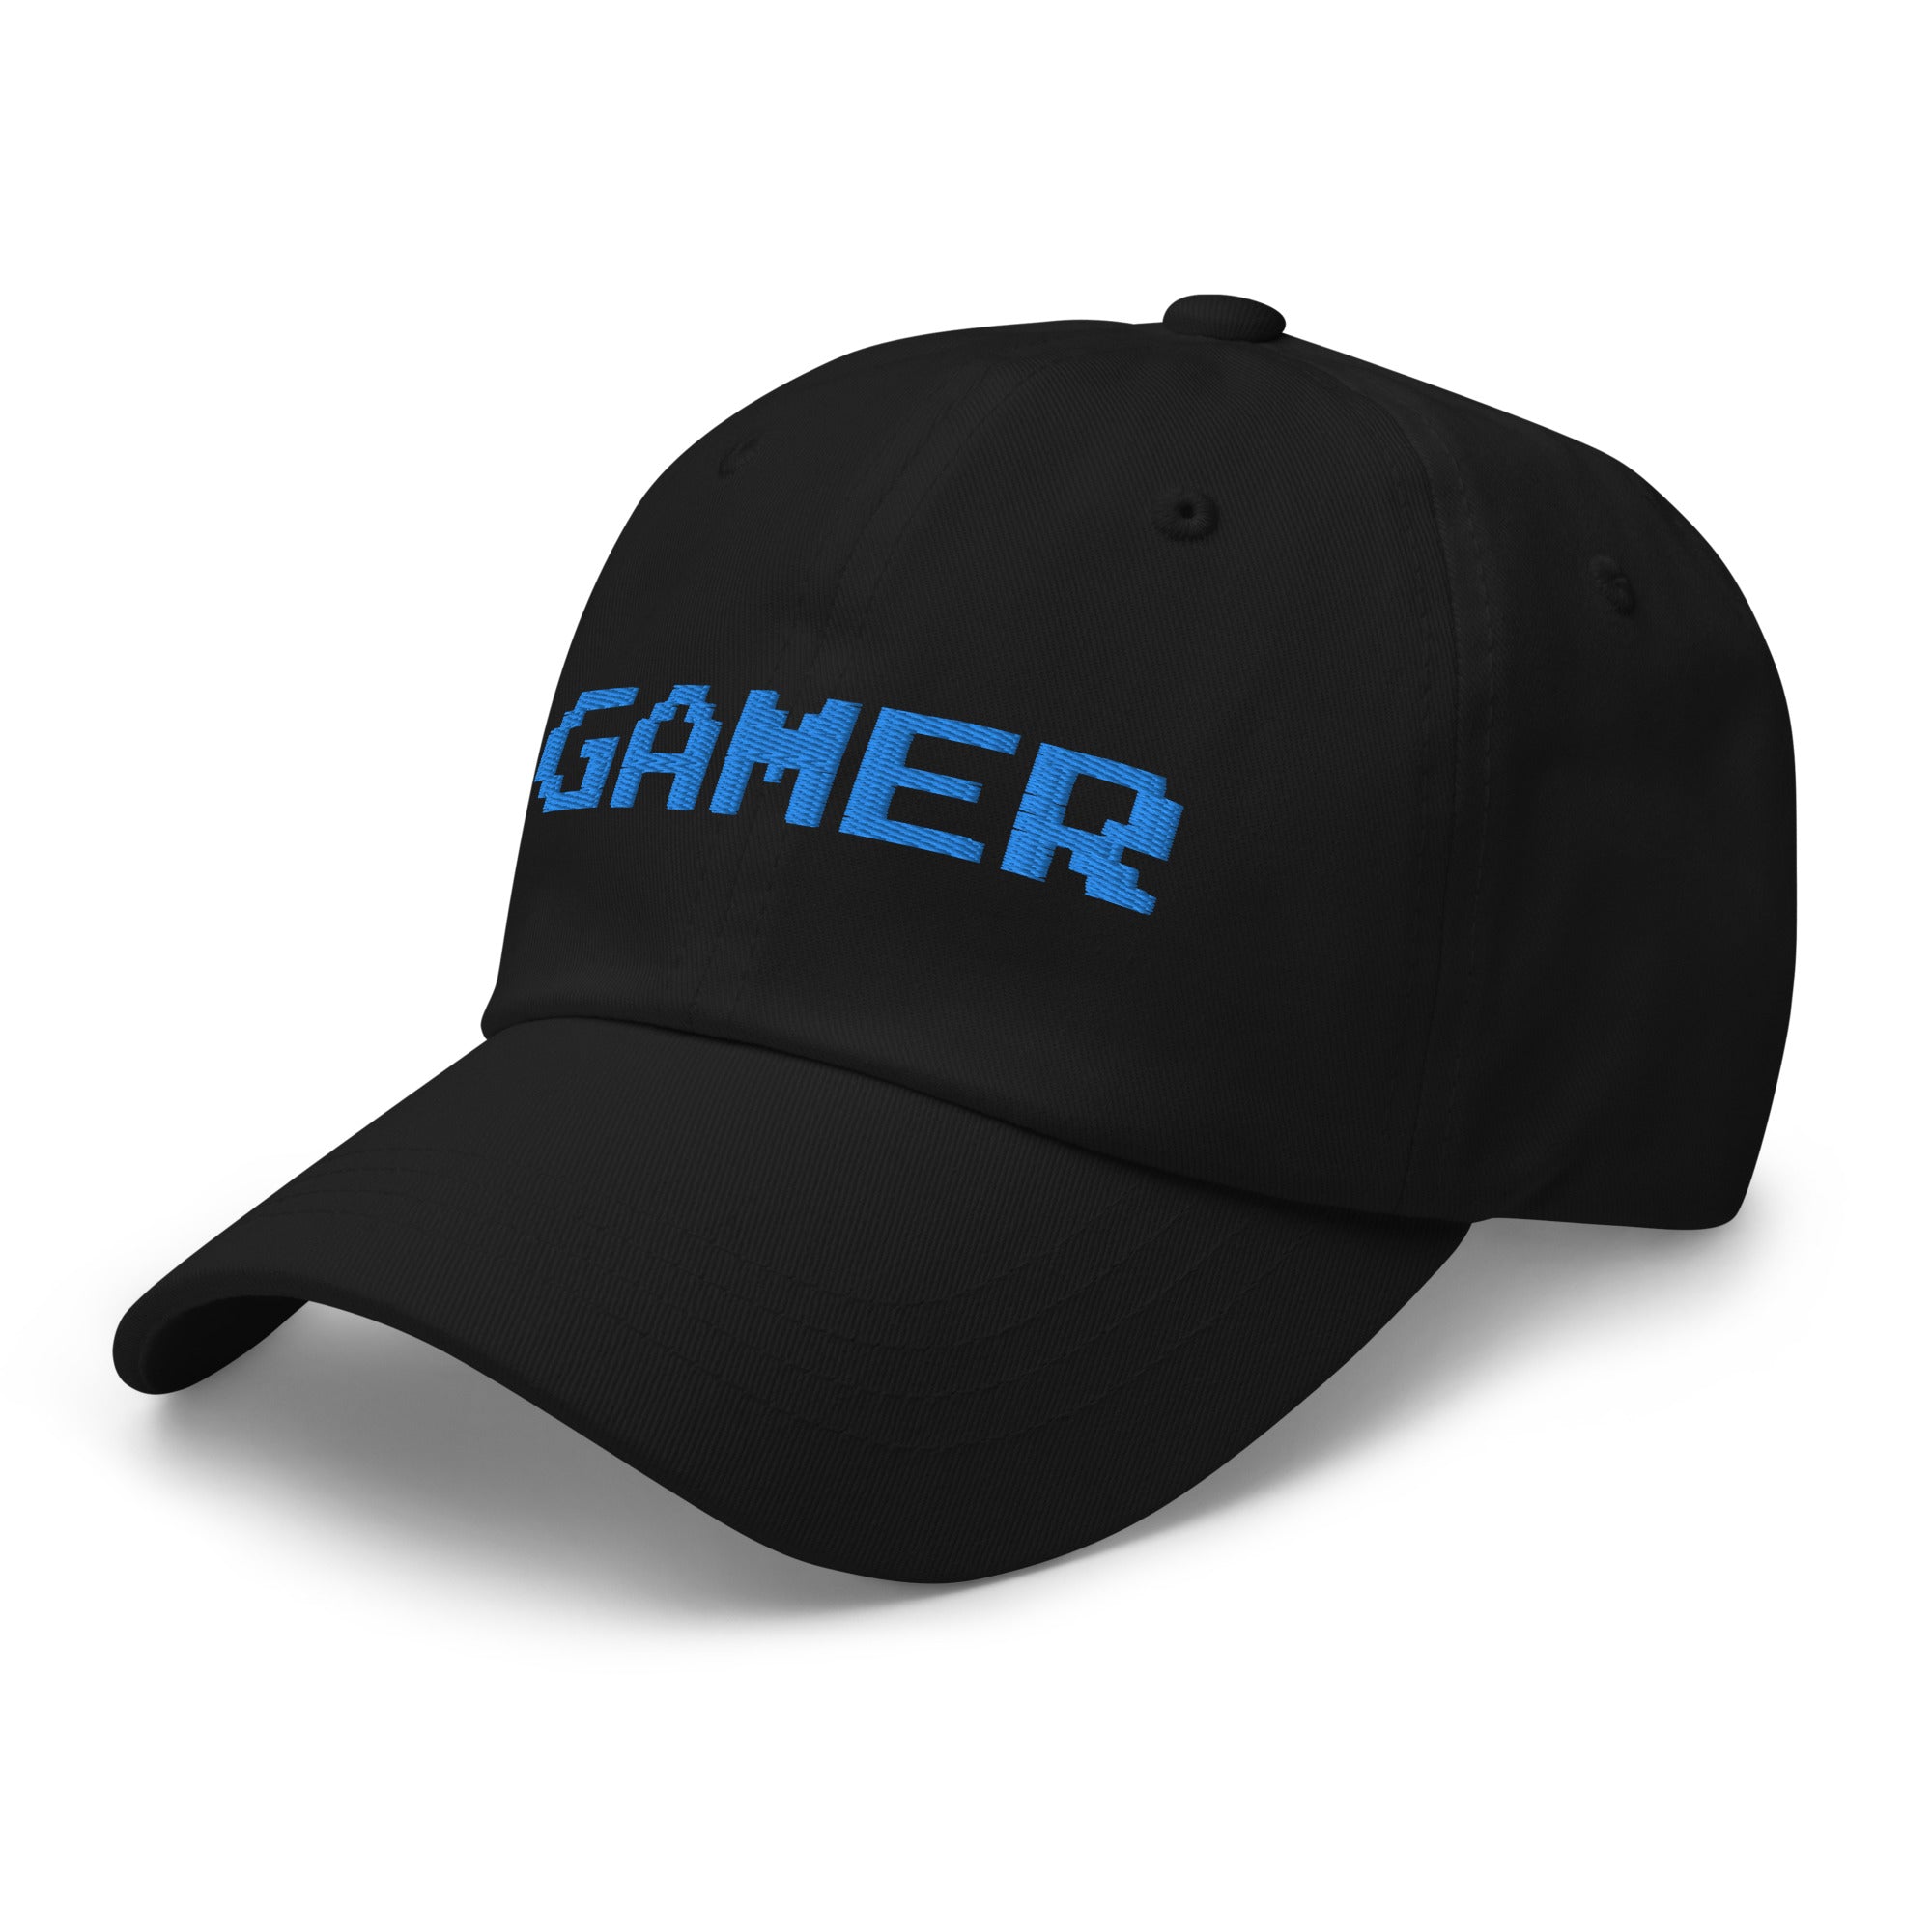 8 Bit Gamer Embroidered Baseball Cap 80's Retro Style Gaming Blue Thread Dad hat - Edge of Life Designs